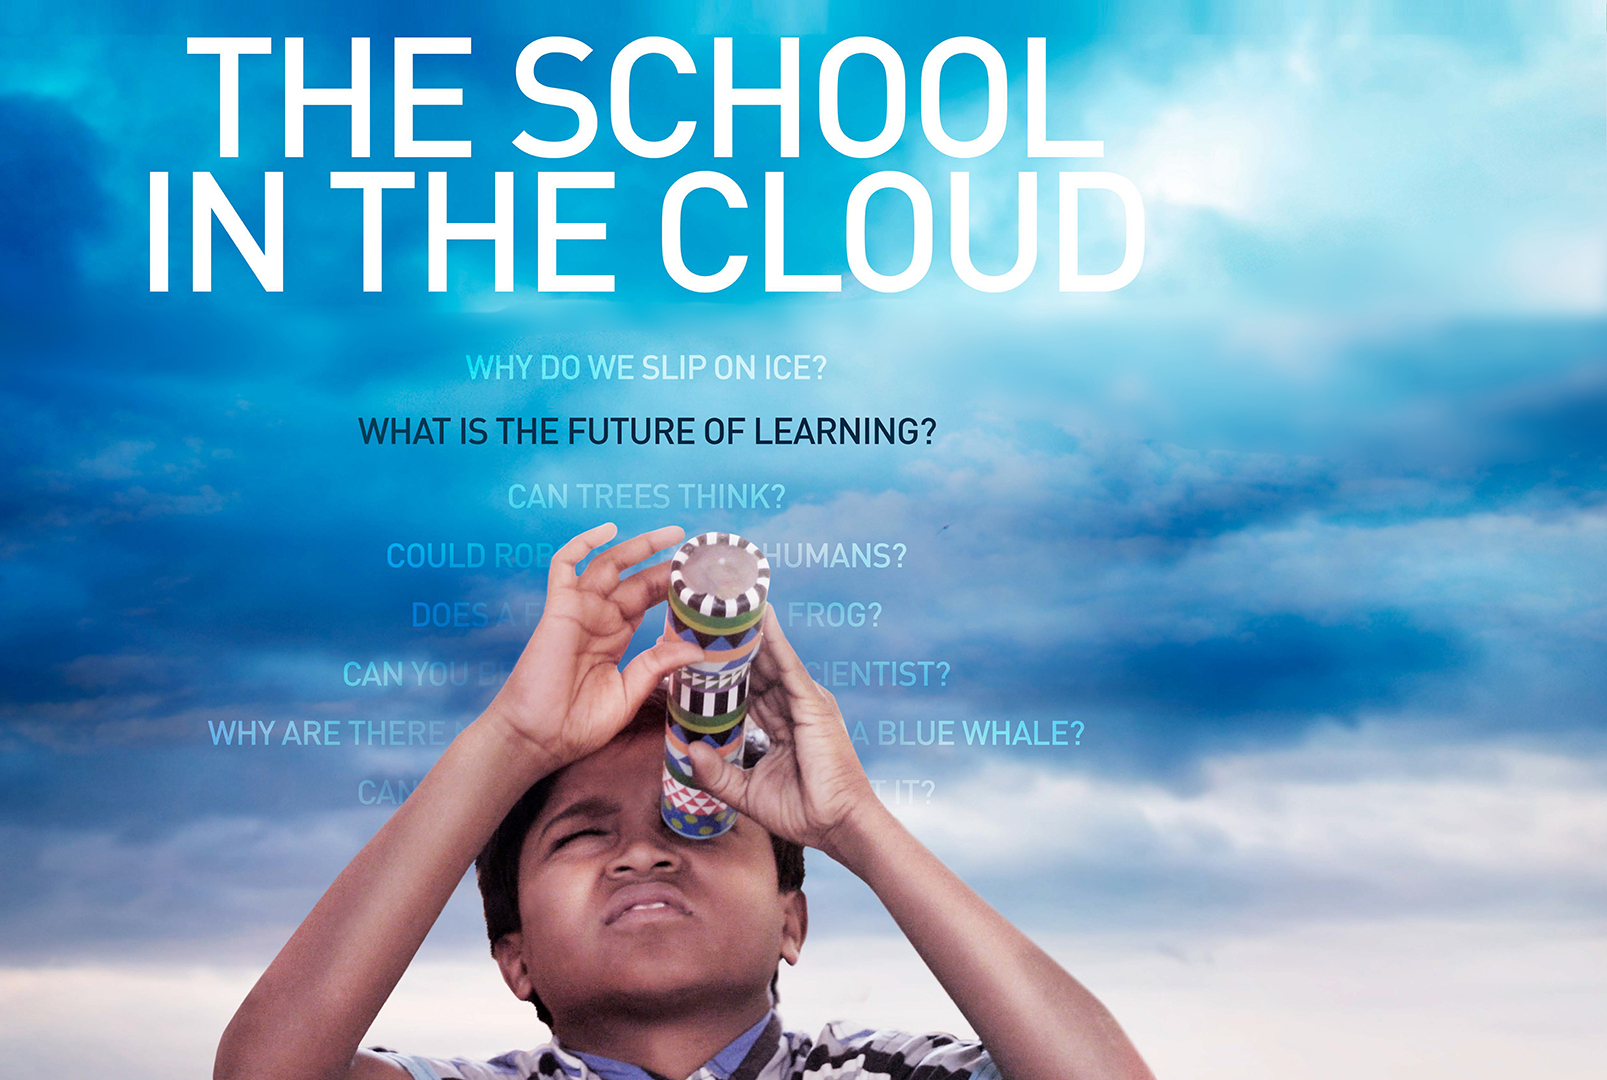 The School in the Cloud, a documentary on Sugata Mitra’s TED Prize
wish, makes its premiere